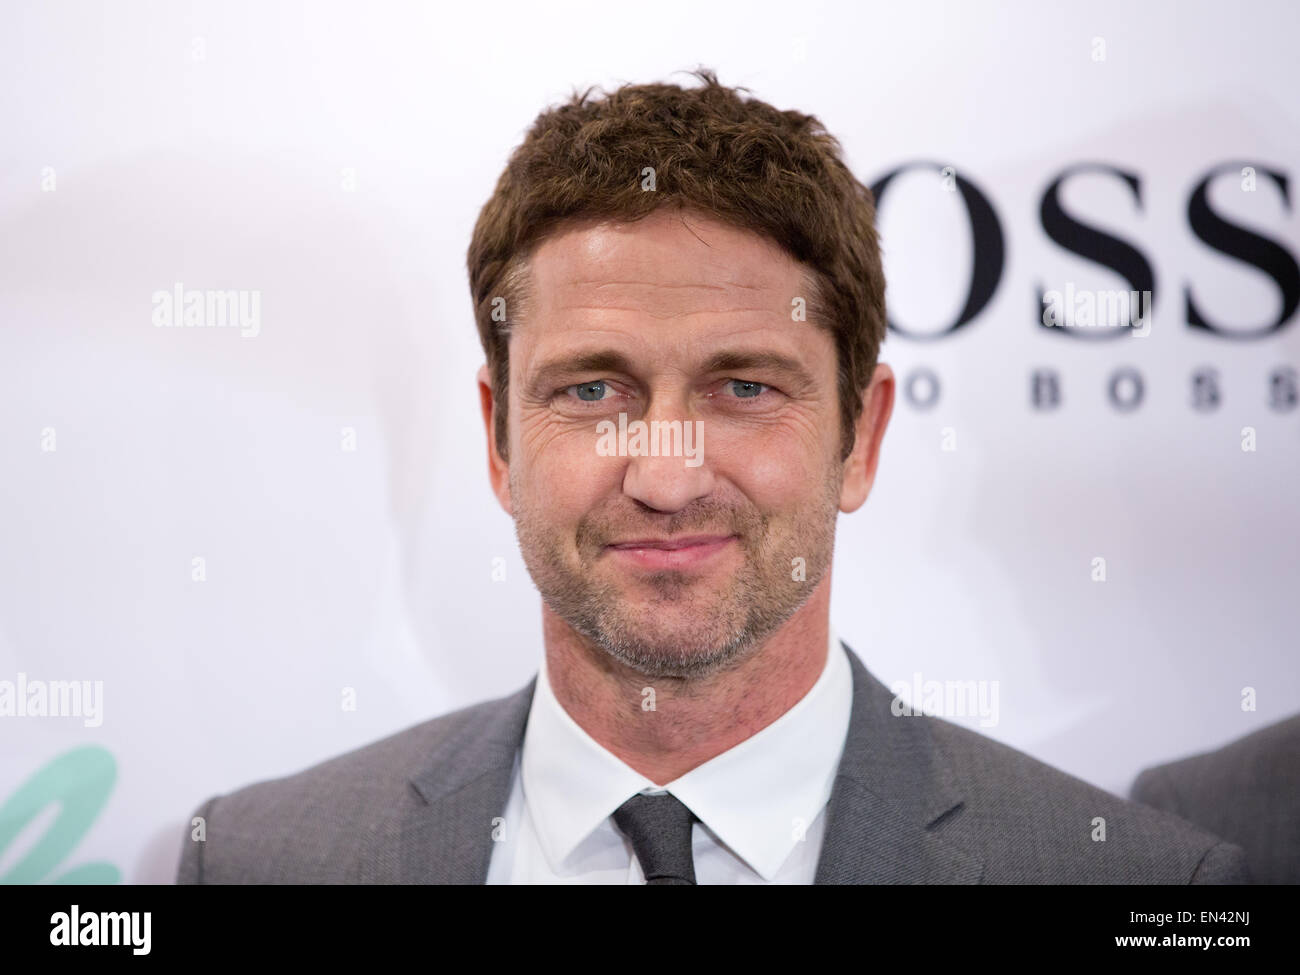 Hamburg, Germany. 25th Apr, 2015. Scottish actor Gerard Butler poses during  the launch of a new BOSS perfume at a Douglas perfumery in Hamburg,  Germany, 25 April 2015. Butler who is the